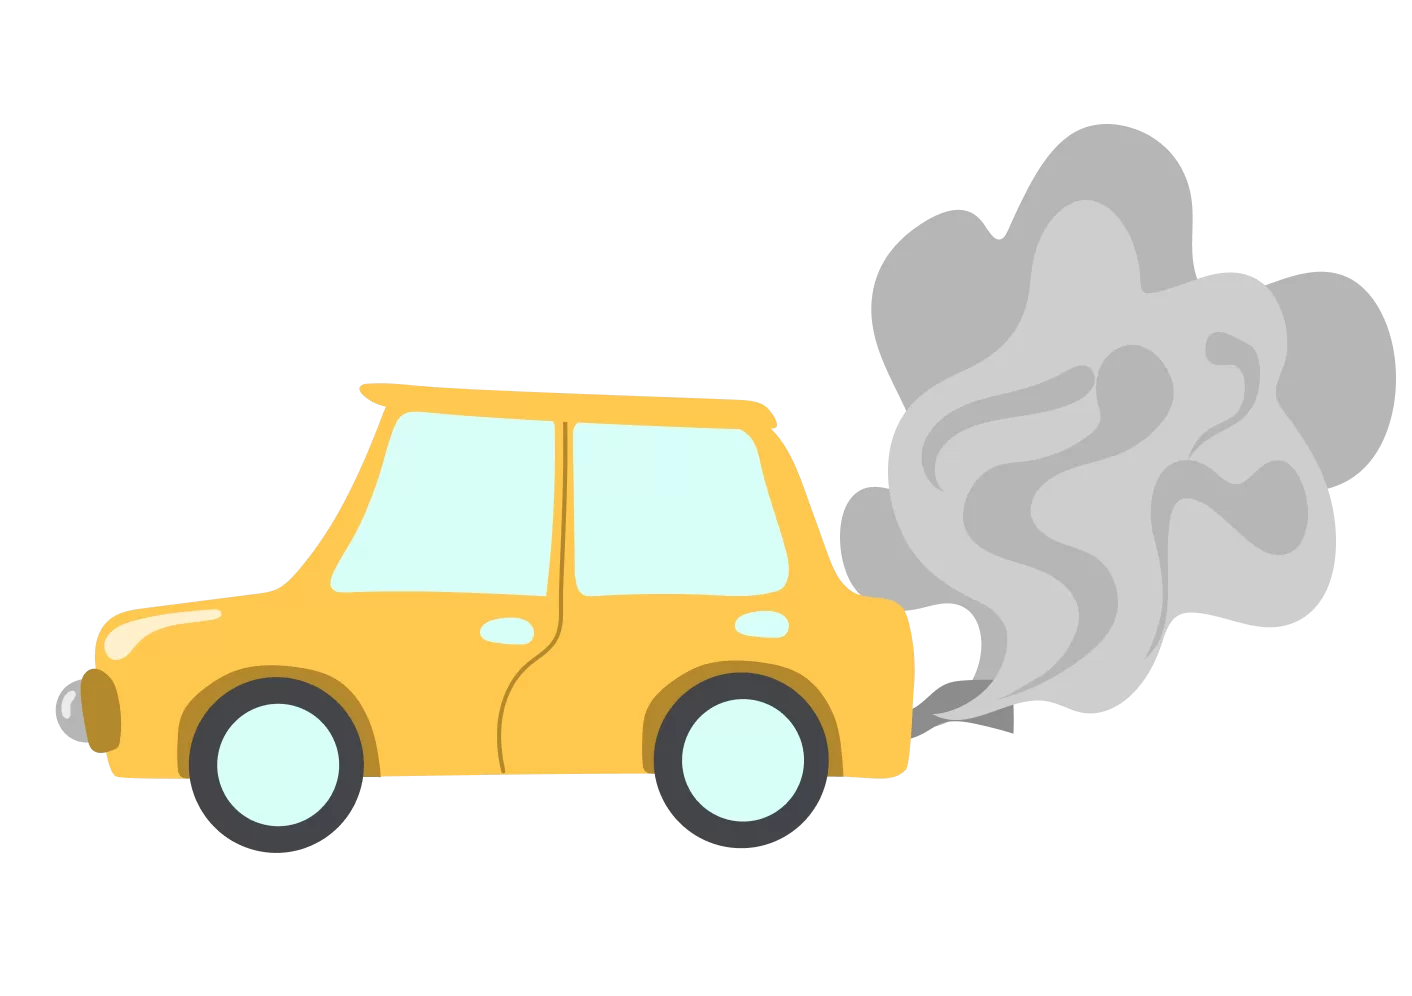 ammonia from vehicular emissions